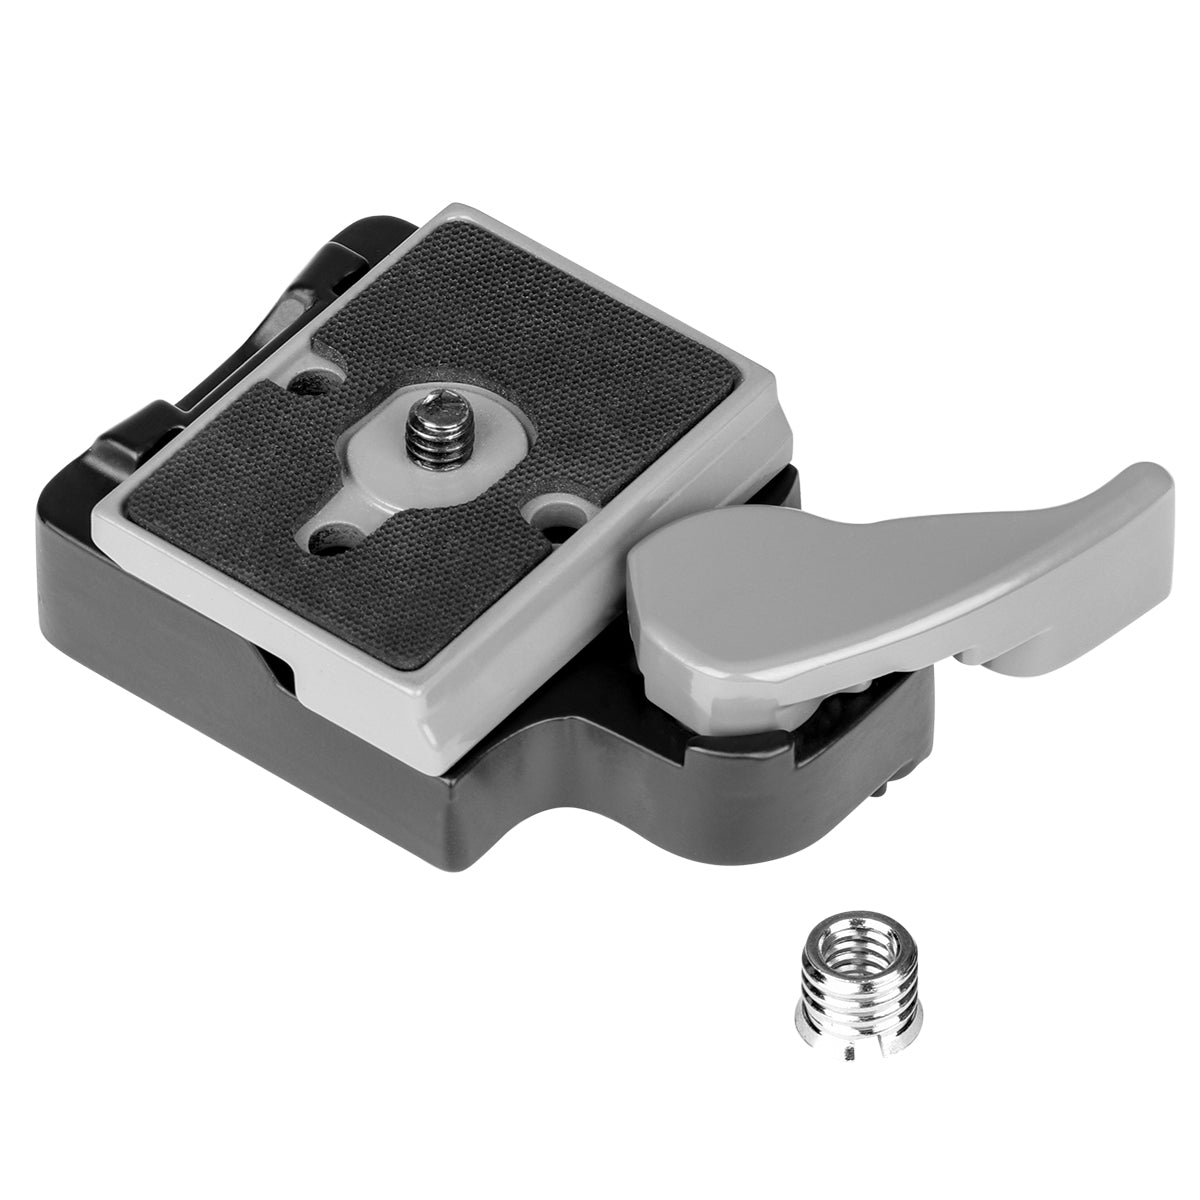 Camera 323 Quick Release Adapter for Manfrotto Tripod 200PL-14 Compat Plate (Black)